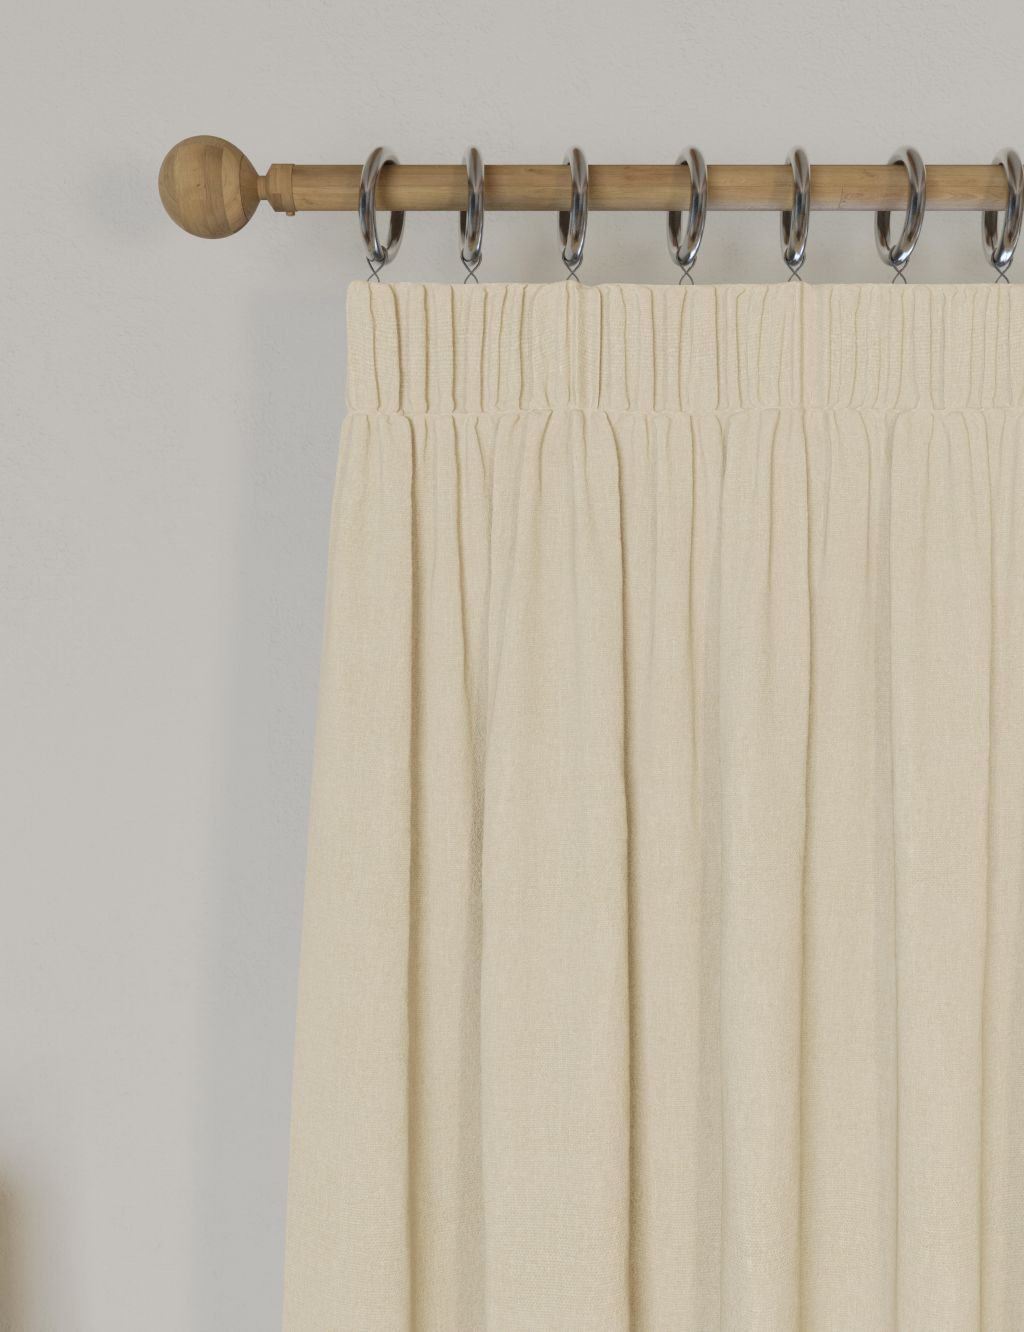 Brushed Pencil Pleat Blackout Thermal Curtains image 1